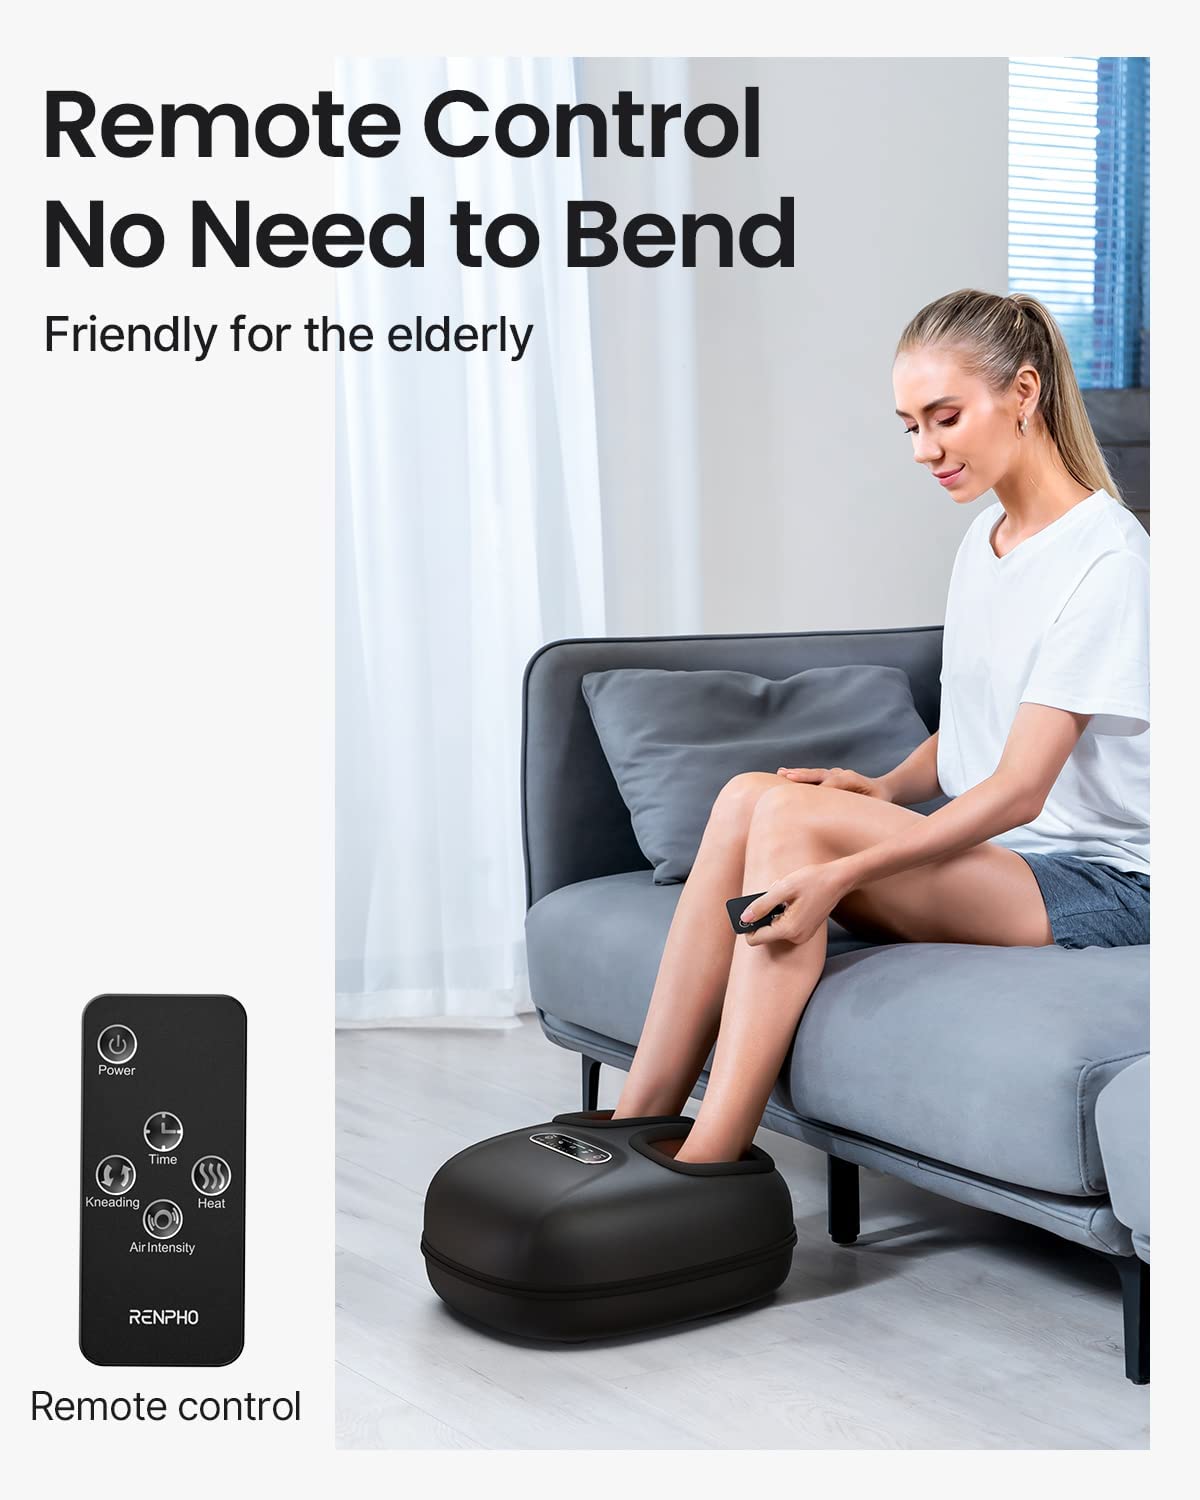 A woman sitting on a couch uses a Renpho EU Shiatsu Foot Massager Lite with a remote. The ad highlights the device's ease of use for the elderly, emphasizing its wellness benefits and showing a close-up of the remote.